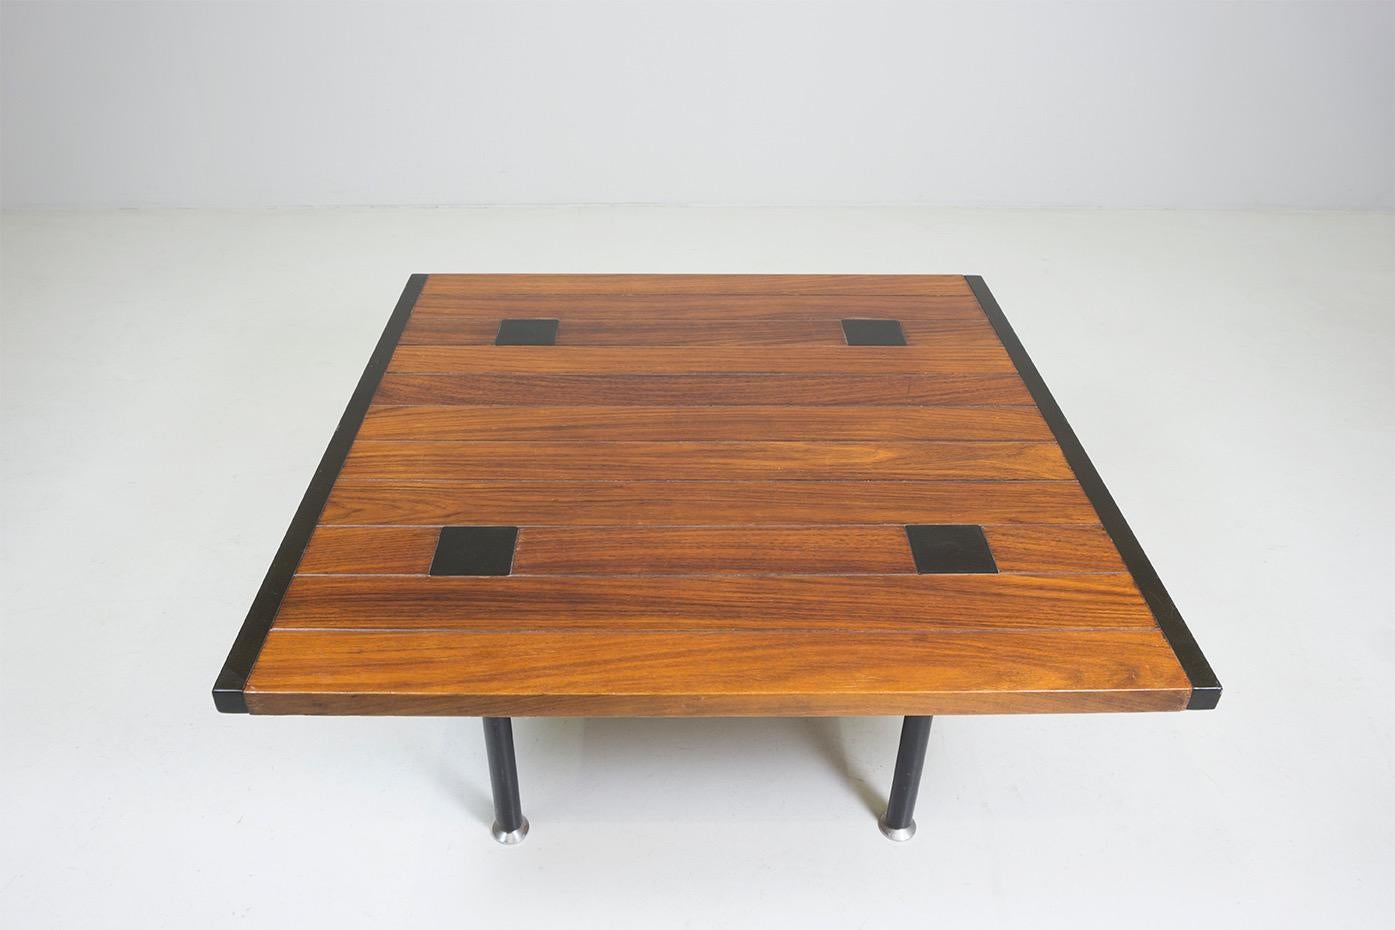 Modern Low Table by Ettore Sottsass, 1957-1958